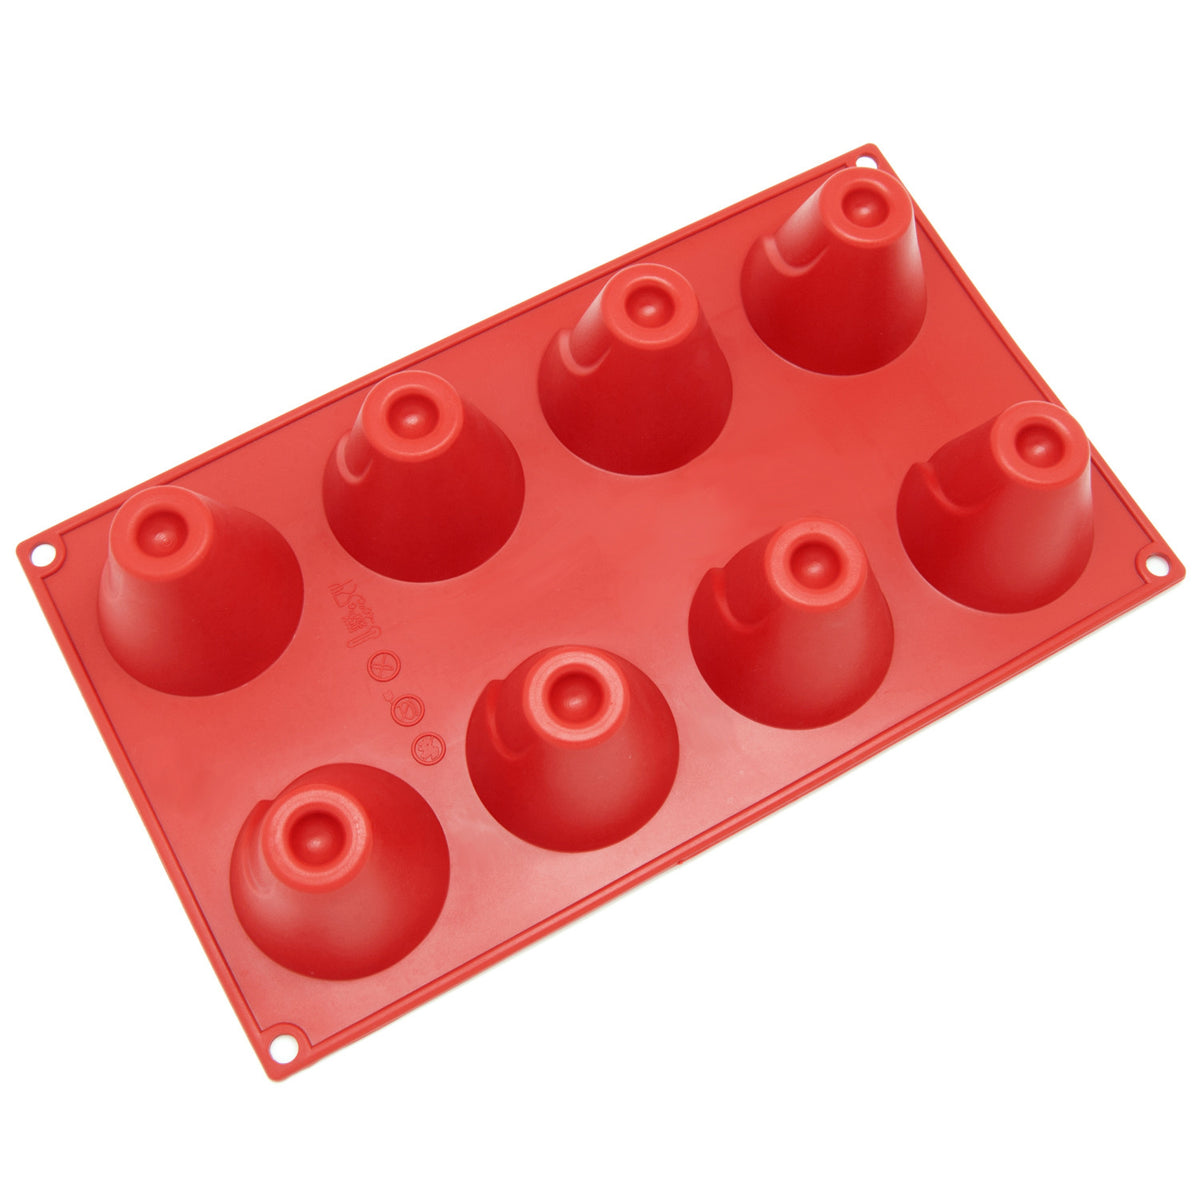 All Clearance Silicone Soap Mold, 1 Pcs 24-Cavity Square Baking Molds for Making Soaps, Ice Cubes, Jelly